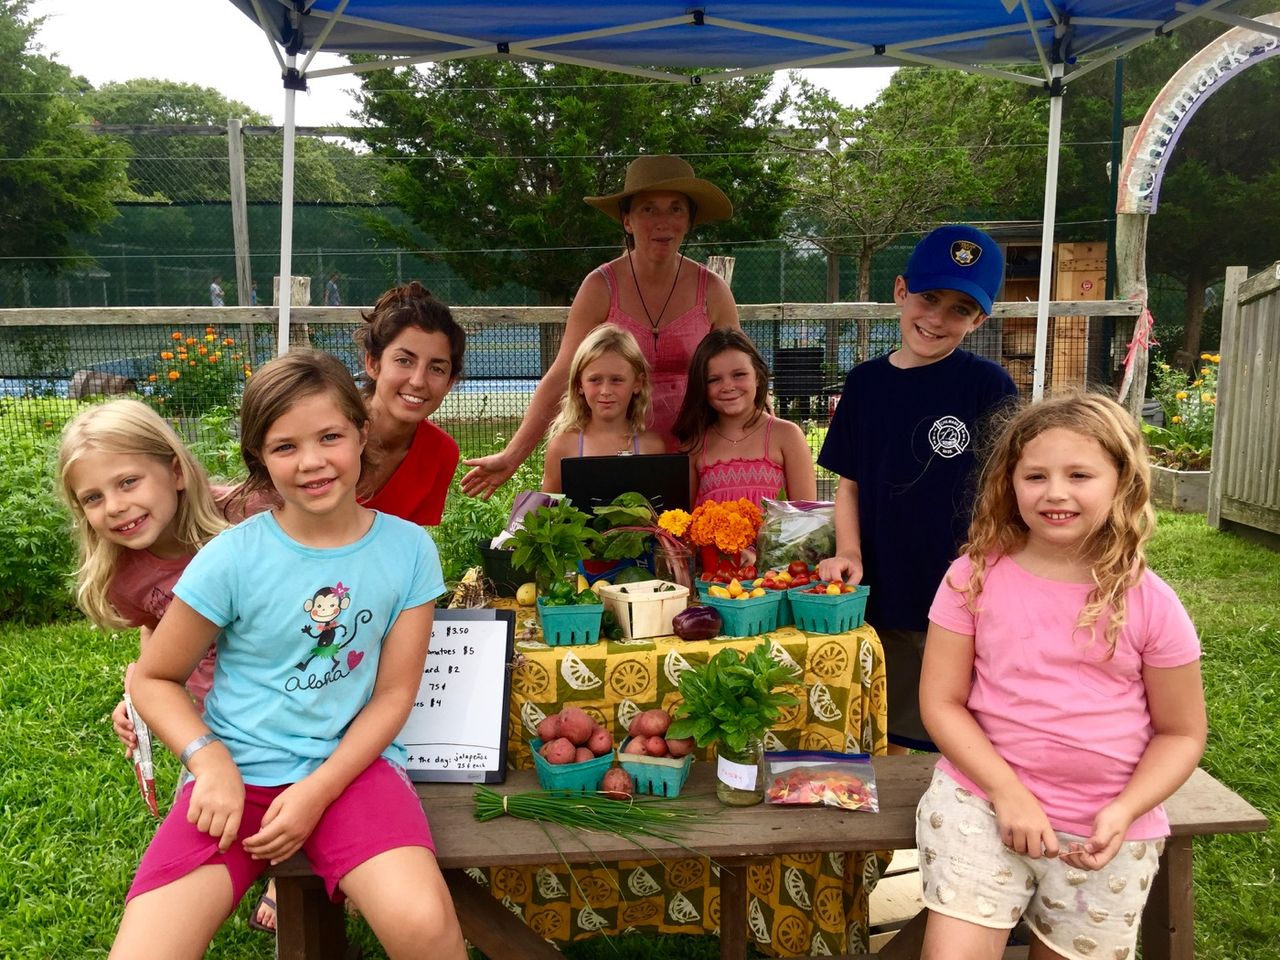 Group photo of kids working at Chillmark Elementary farm stand.